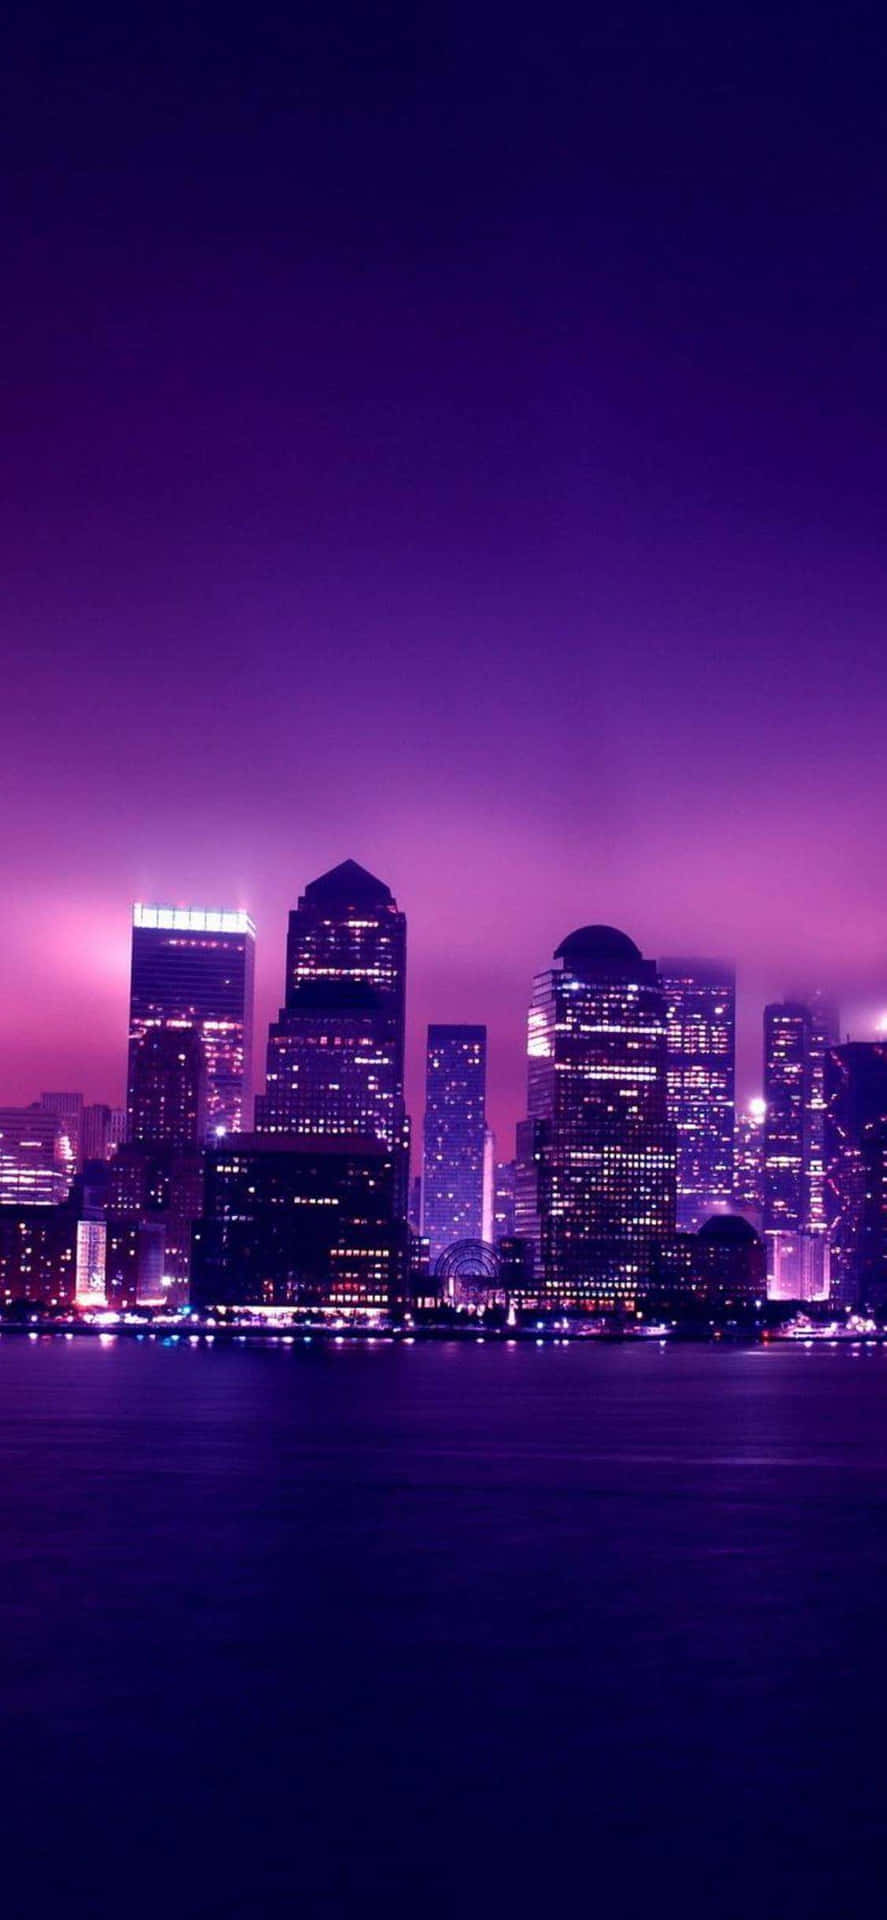 A Purple Skyline With Buildings And Lights